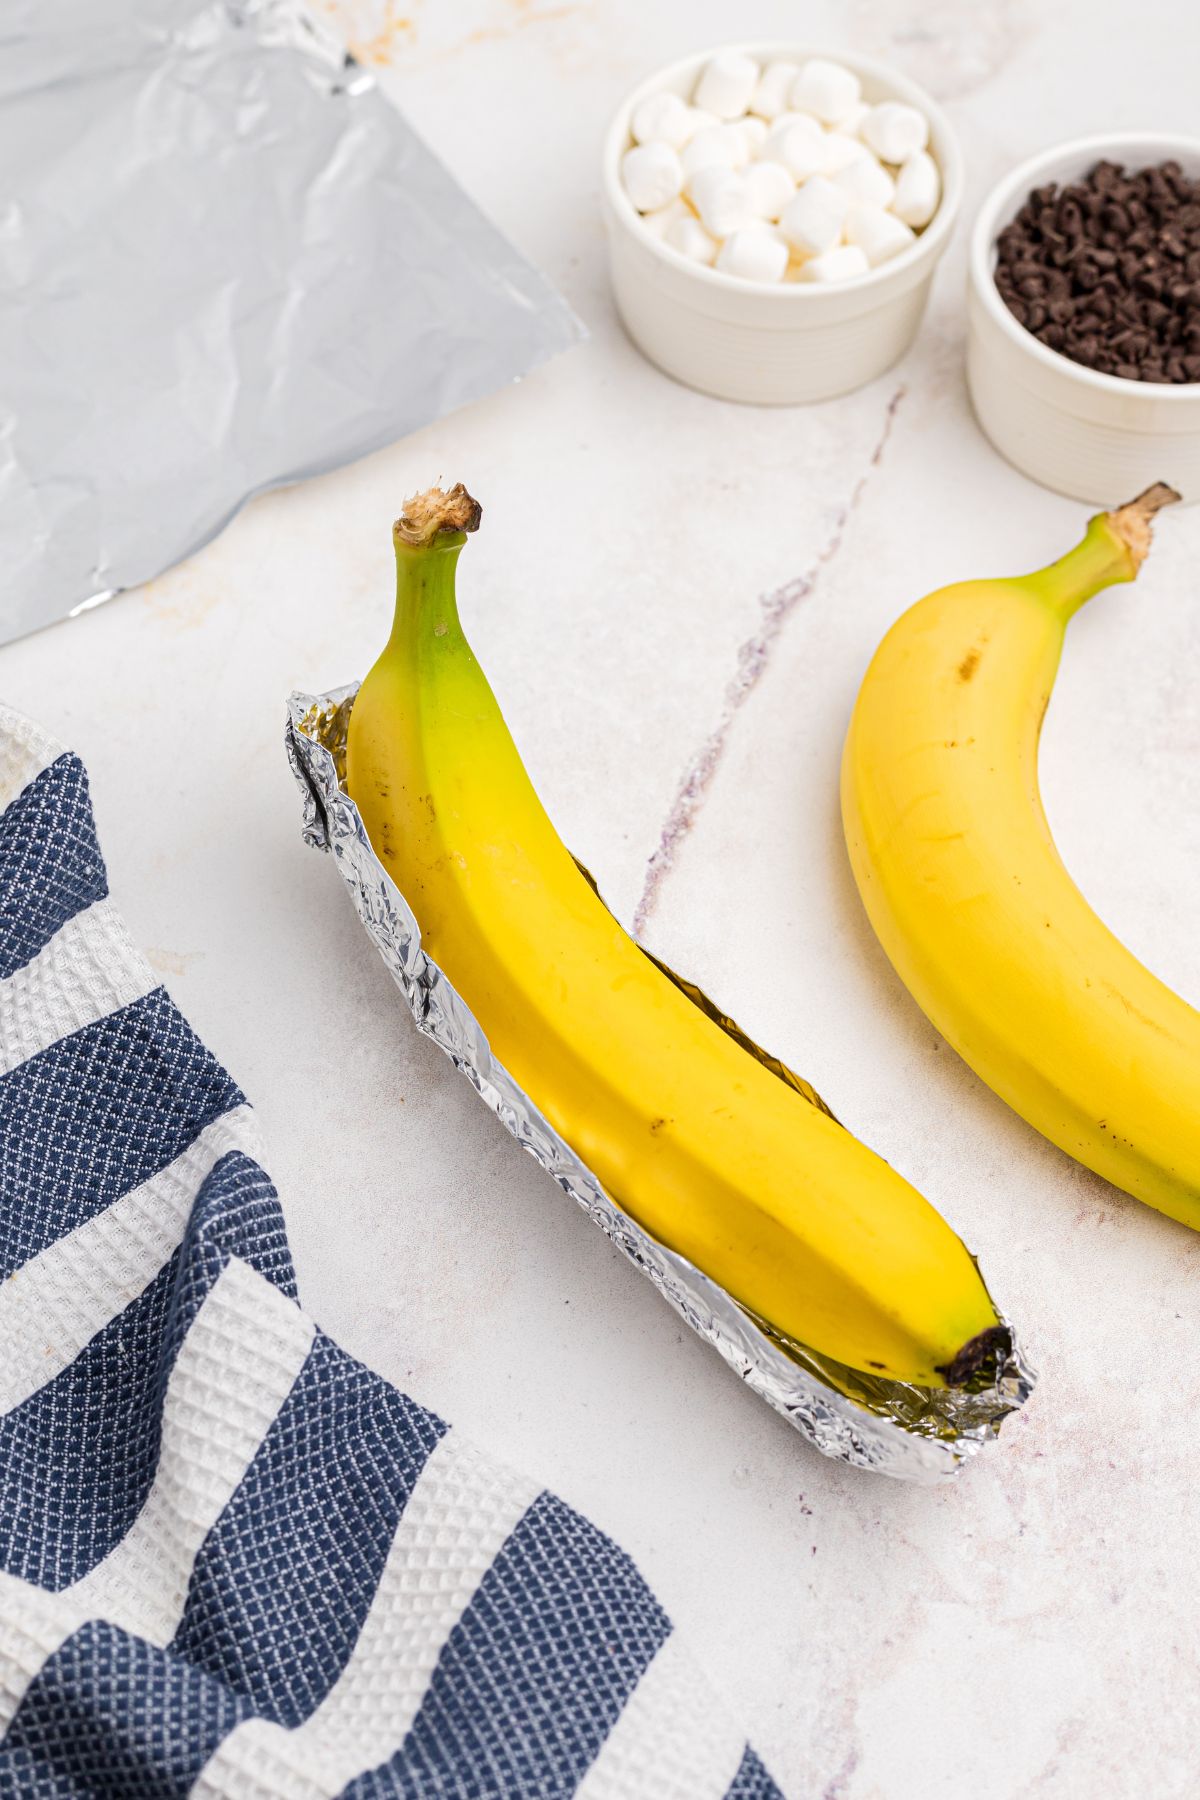 Bananas sitting in foil sling on a marble table.